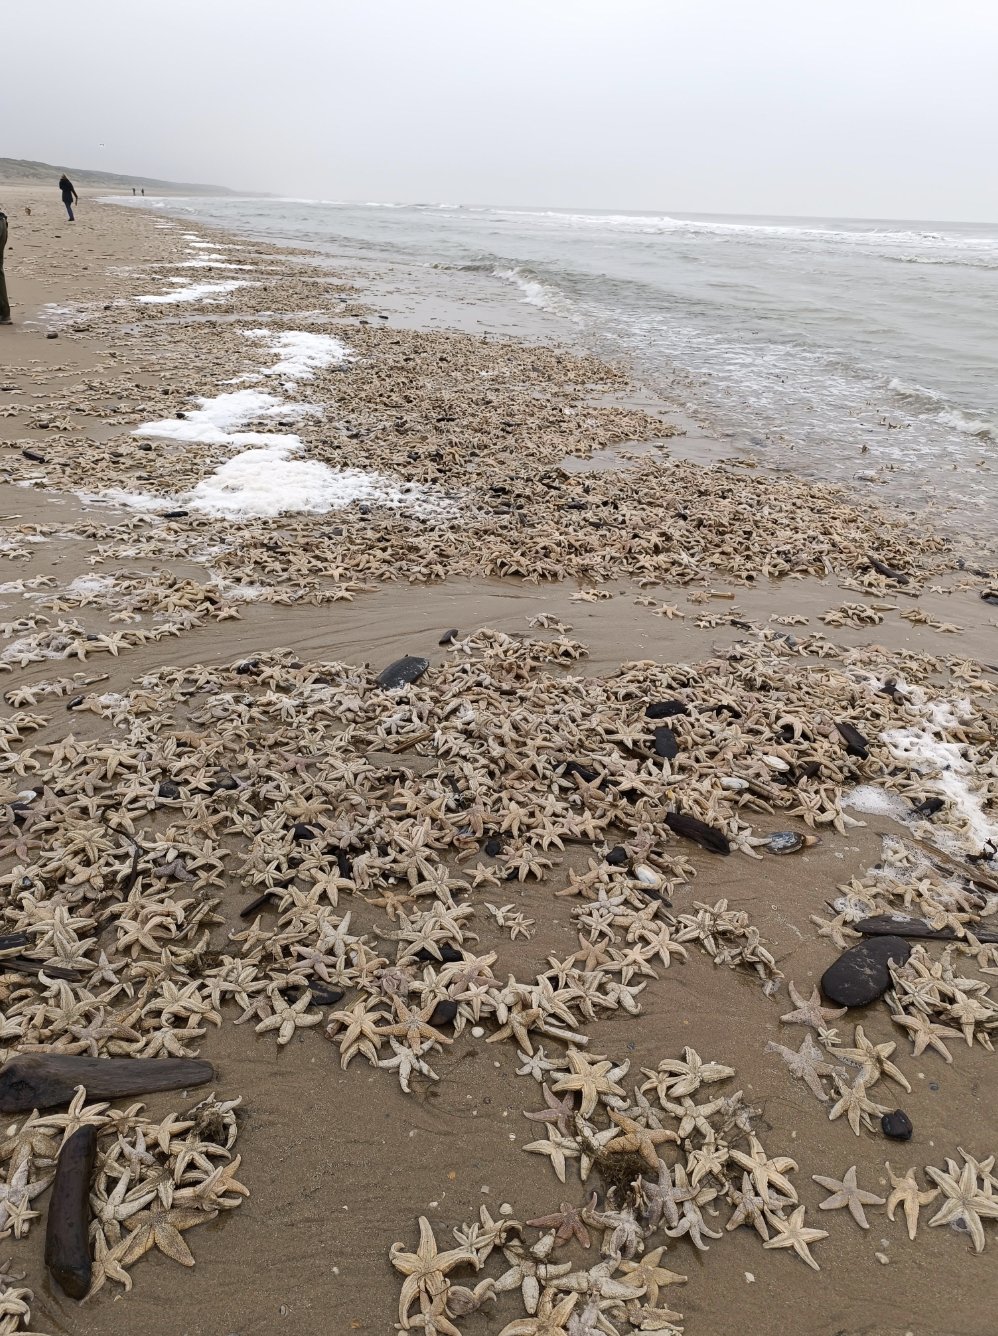 Thousands of starfish washed up on shore in the Netherlands.